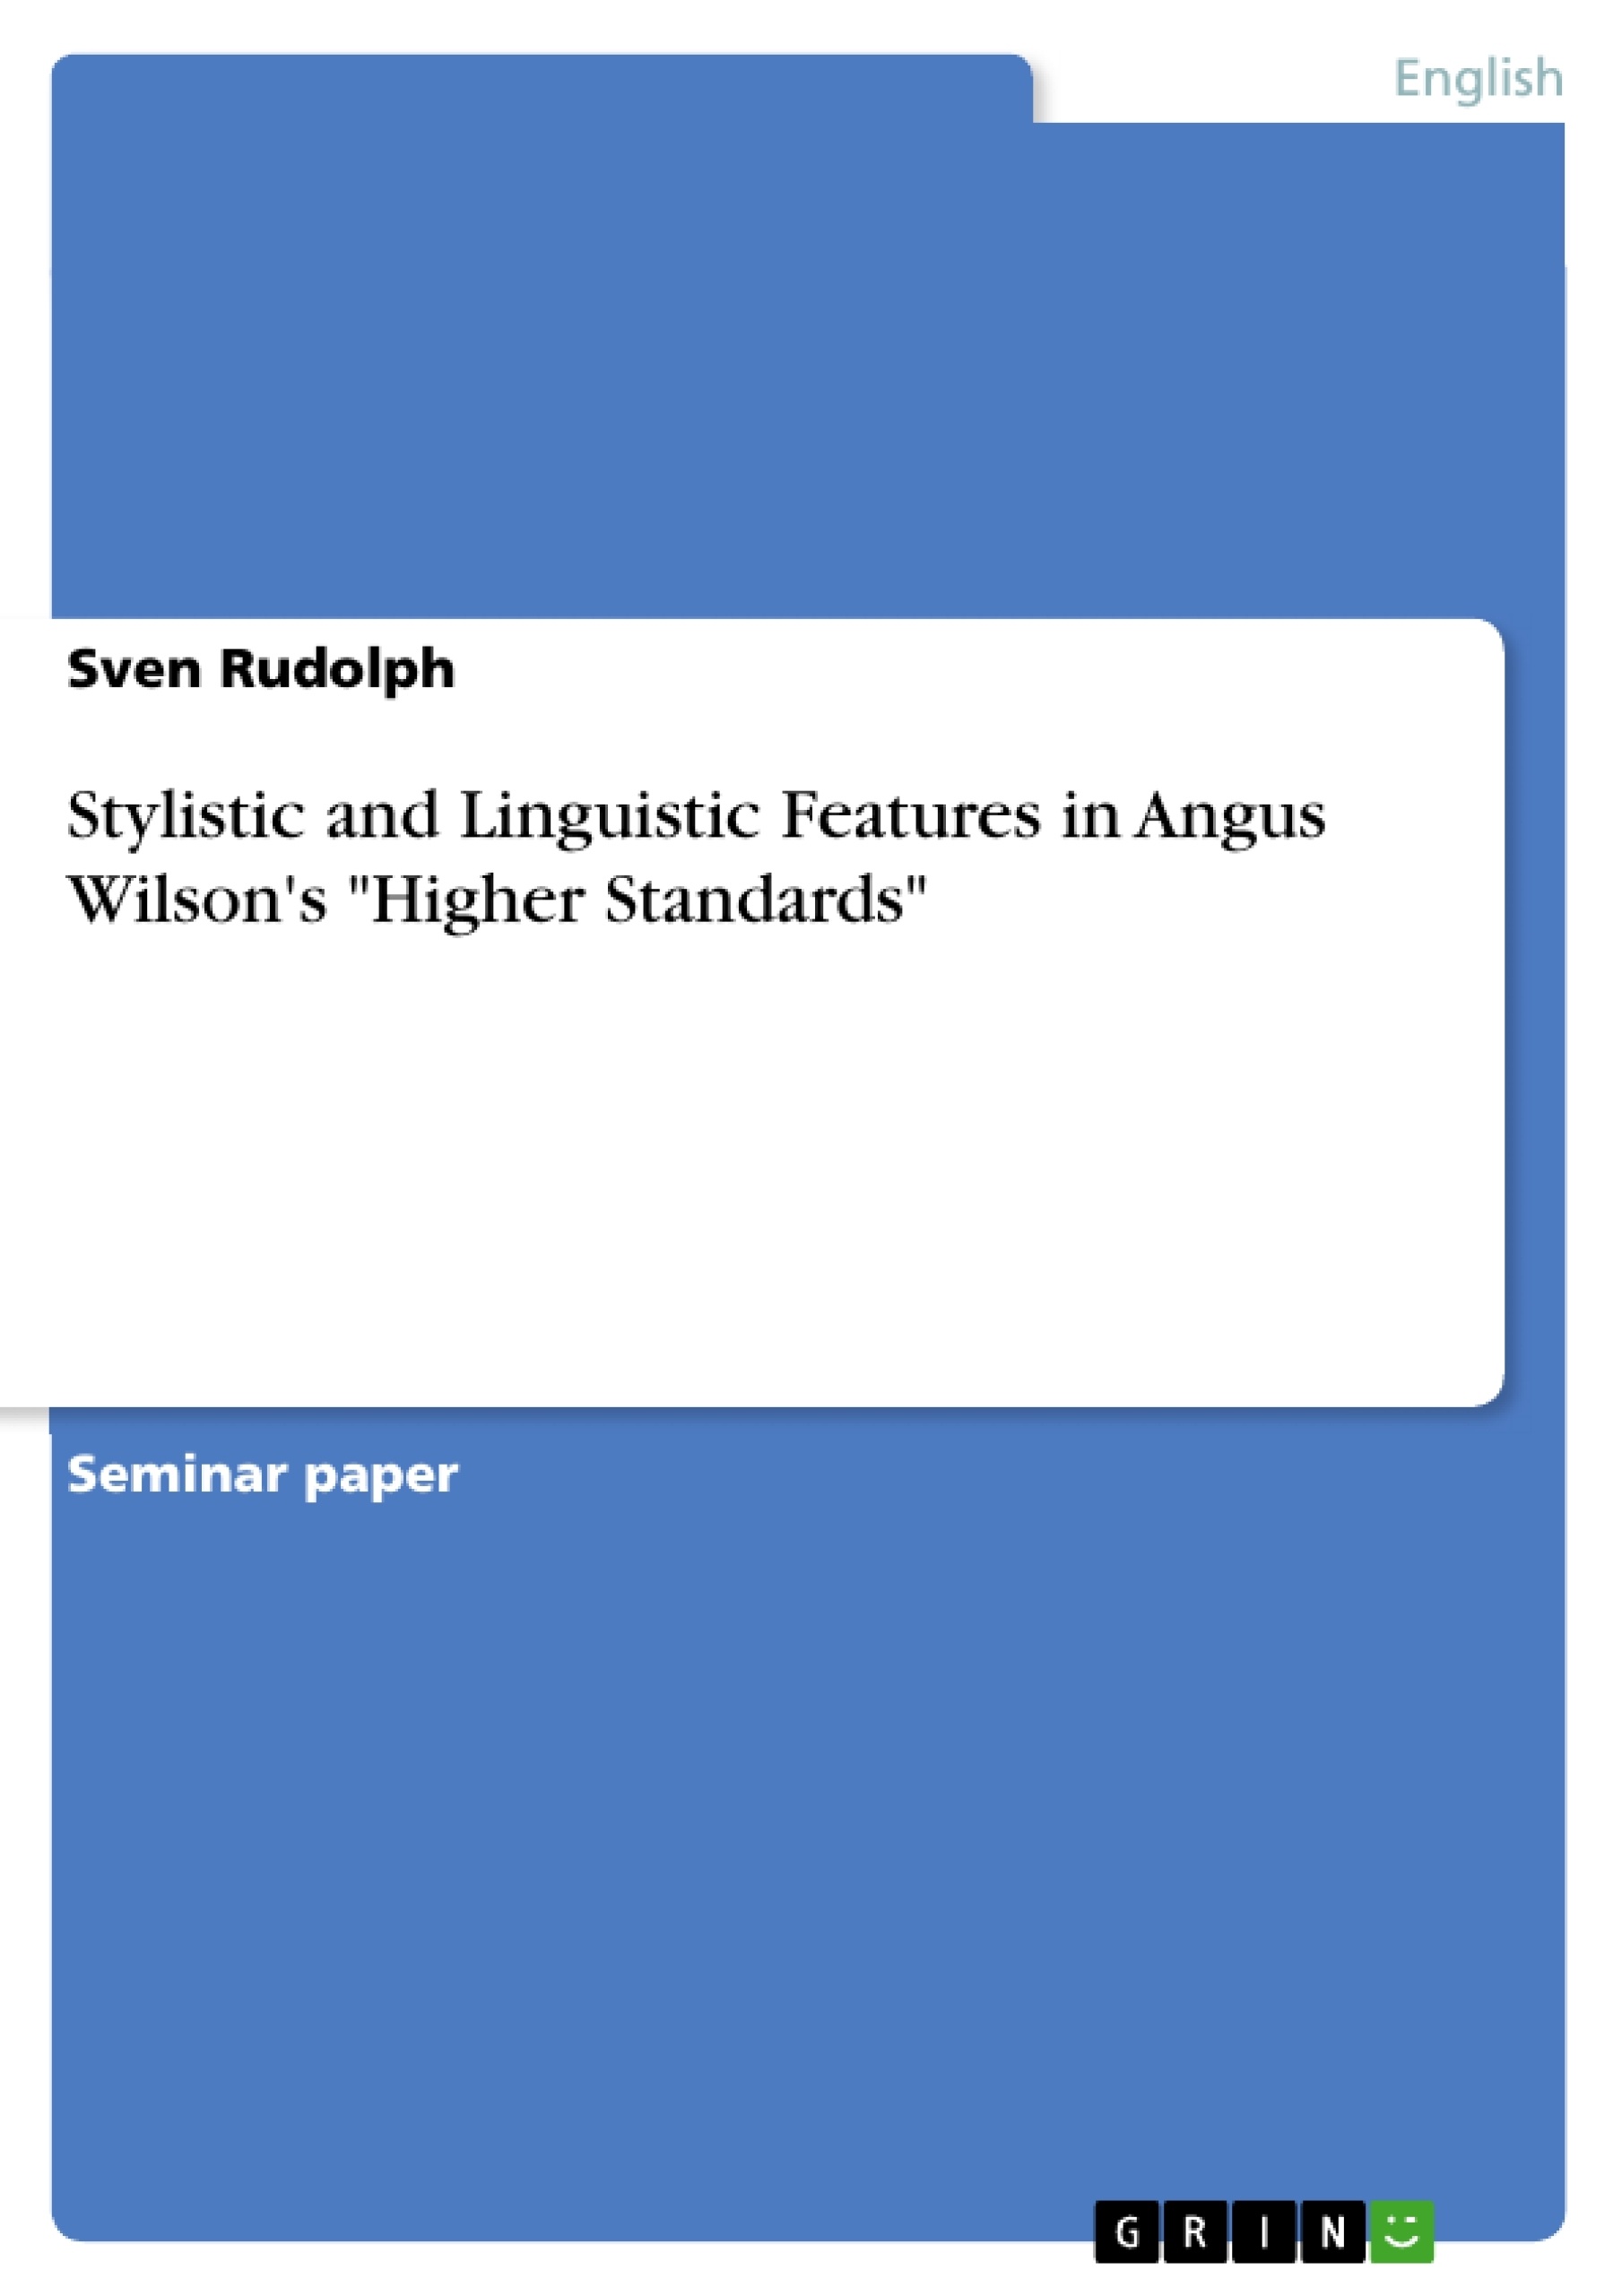 Título: Stylistic and Linguistic Features in Angus Wilson's "Higher Standards"